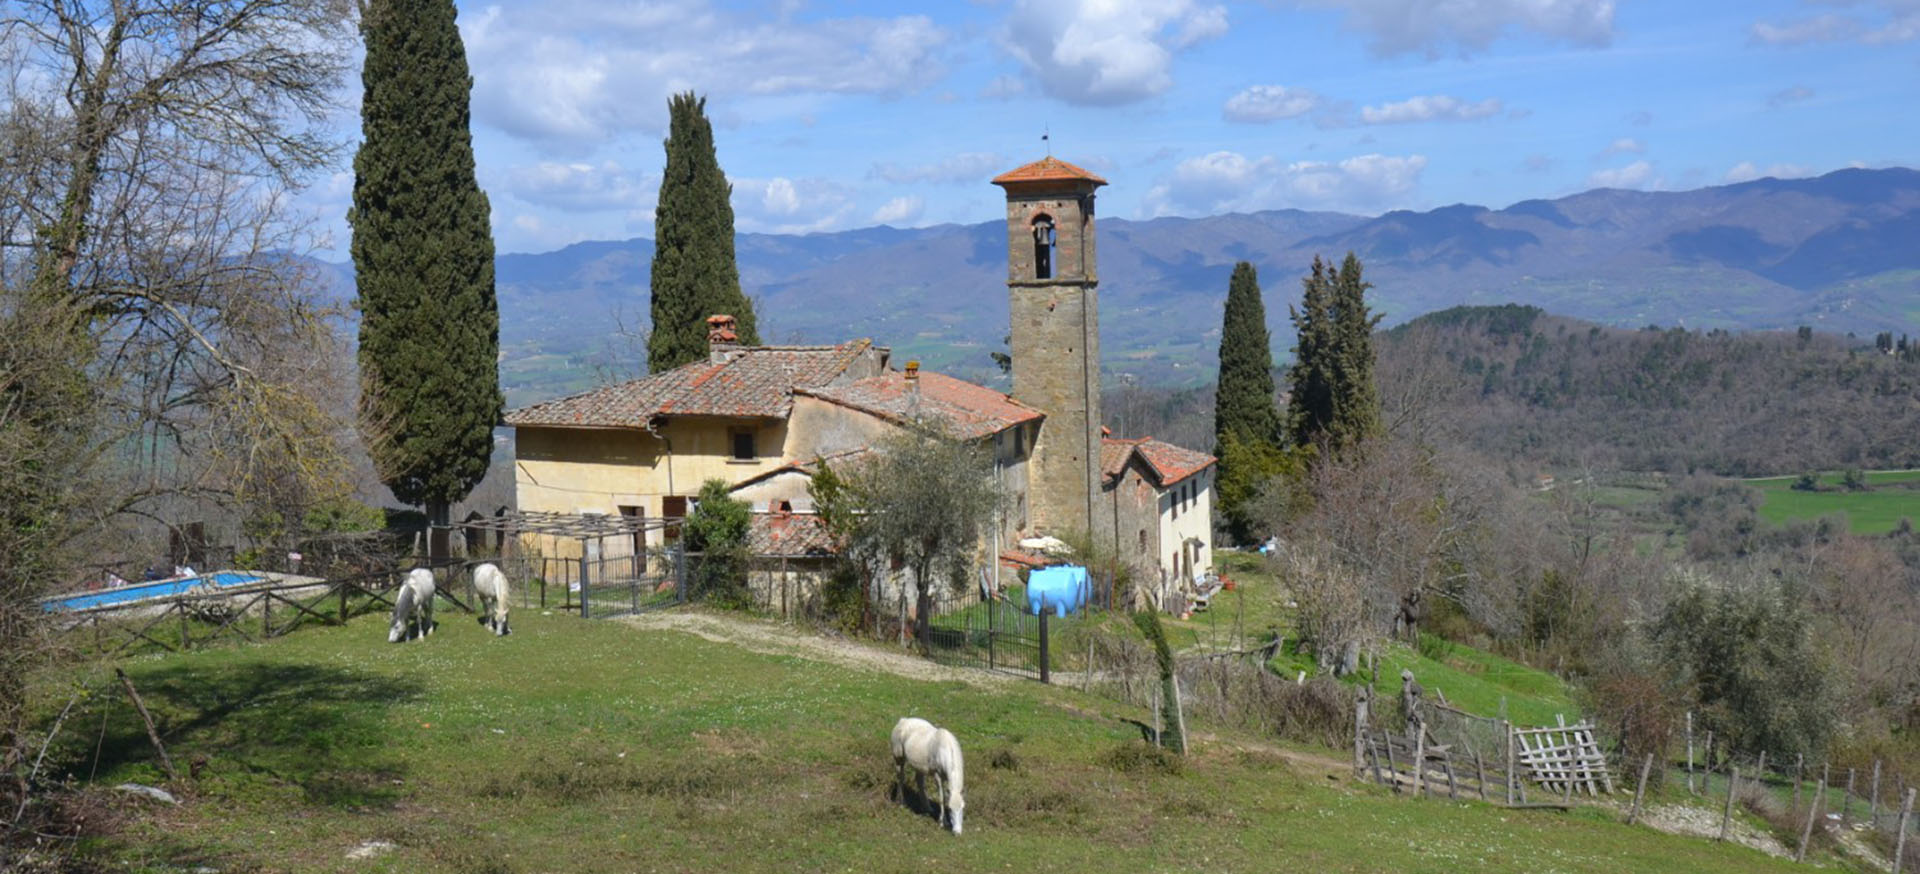 B Guide - Guided Tours and Excursions in Tuscany